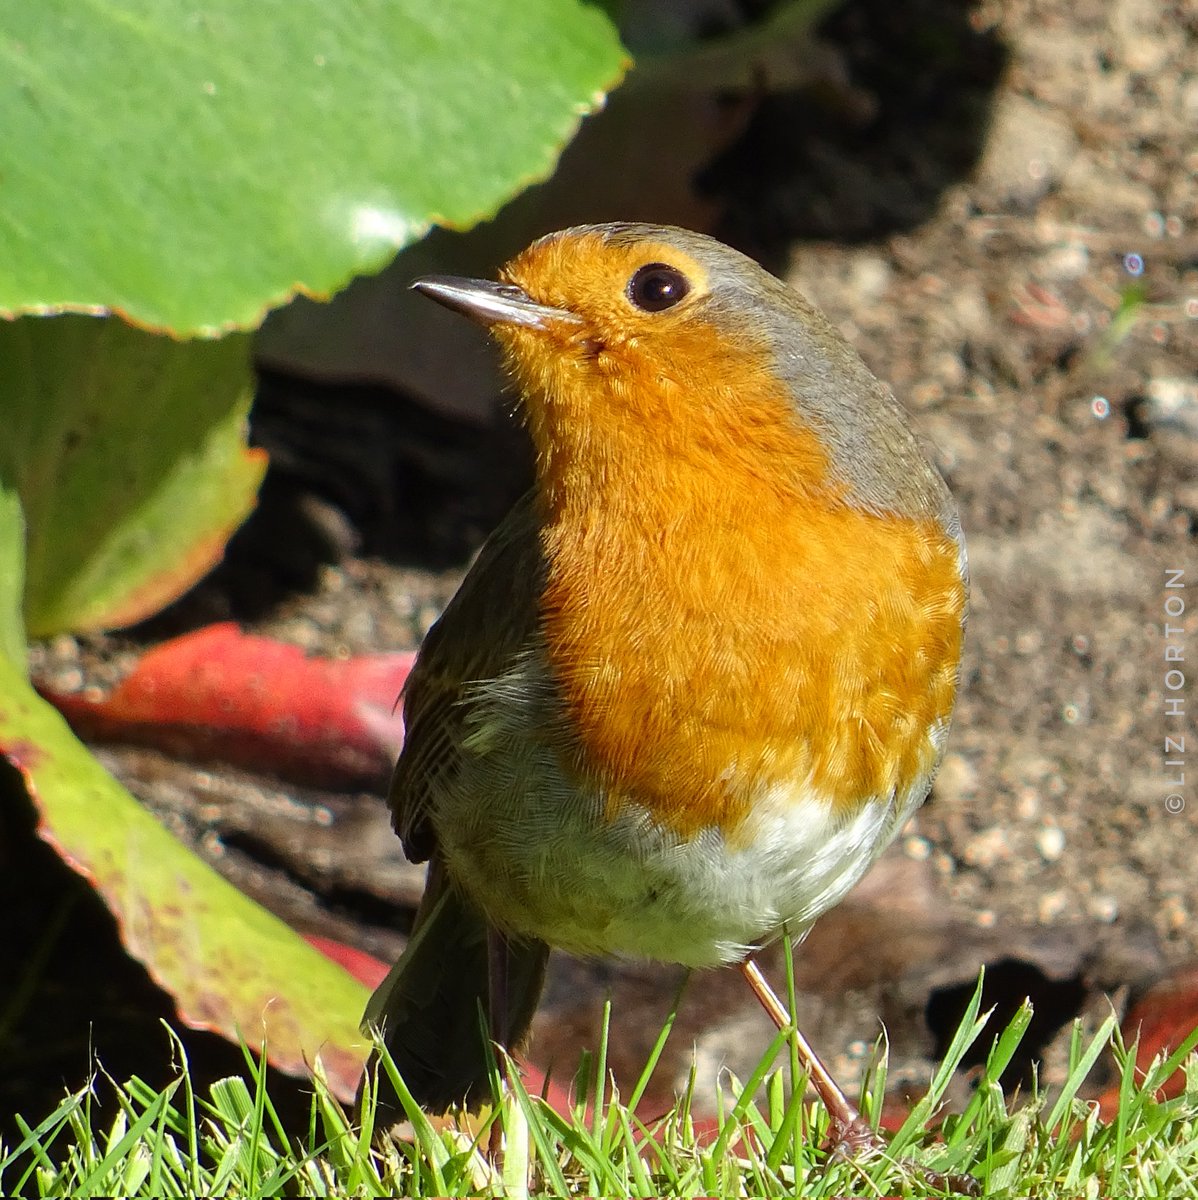 The dawn chorus was led by a blackbird this morning. However, my pics of him are blurry, so it's another pic of a #robin with Best Wishes for a Happy Day..😁 #nature #wildlife #birds #photography #birdwatching #birdphotography #BirdTwitter #birdtonic #art #naturelovers .. 🌱🧡🕊